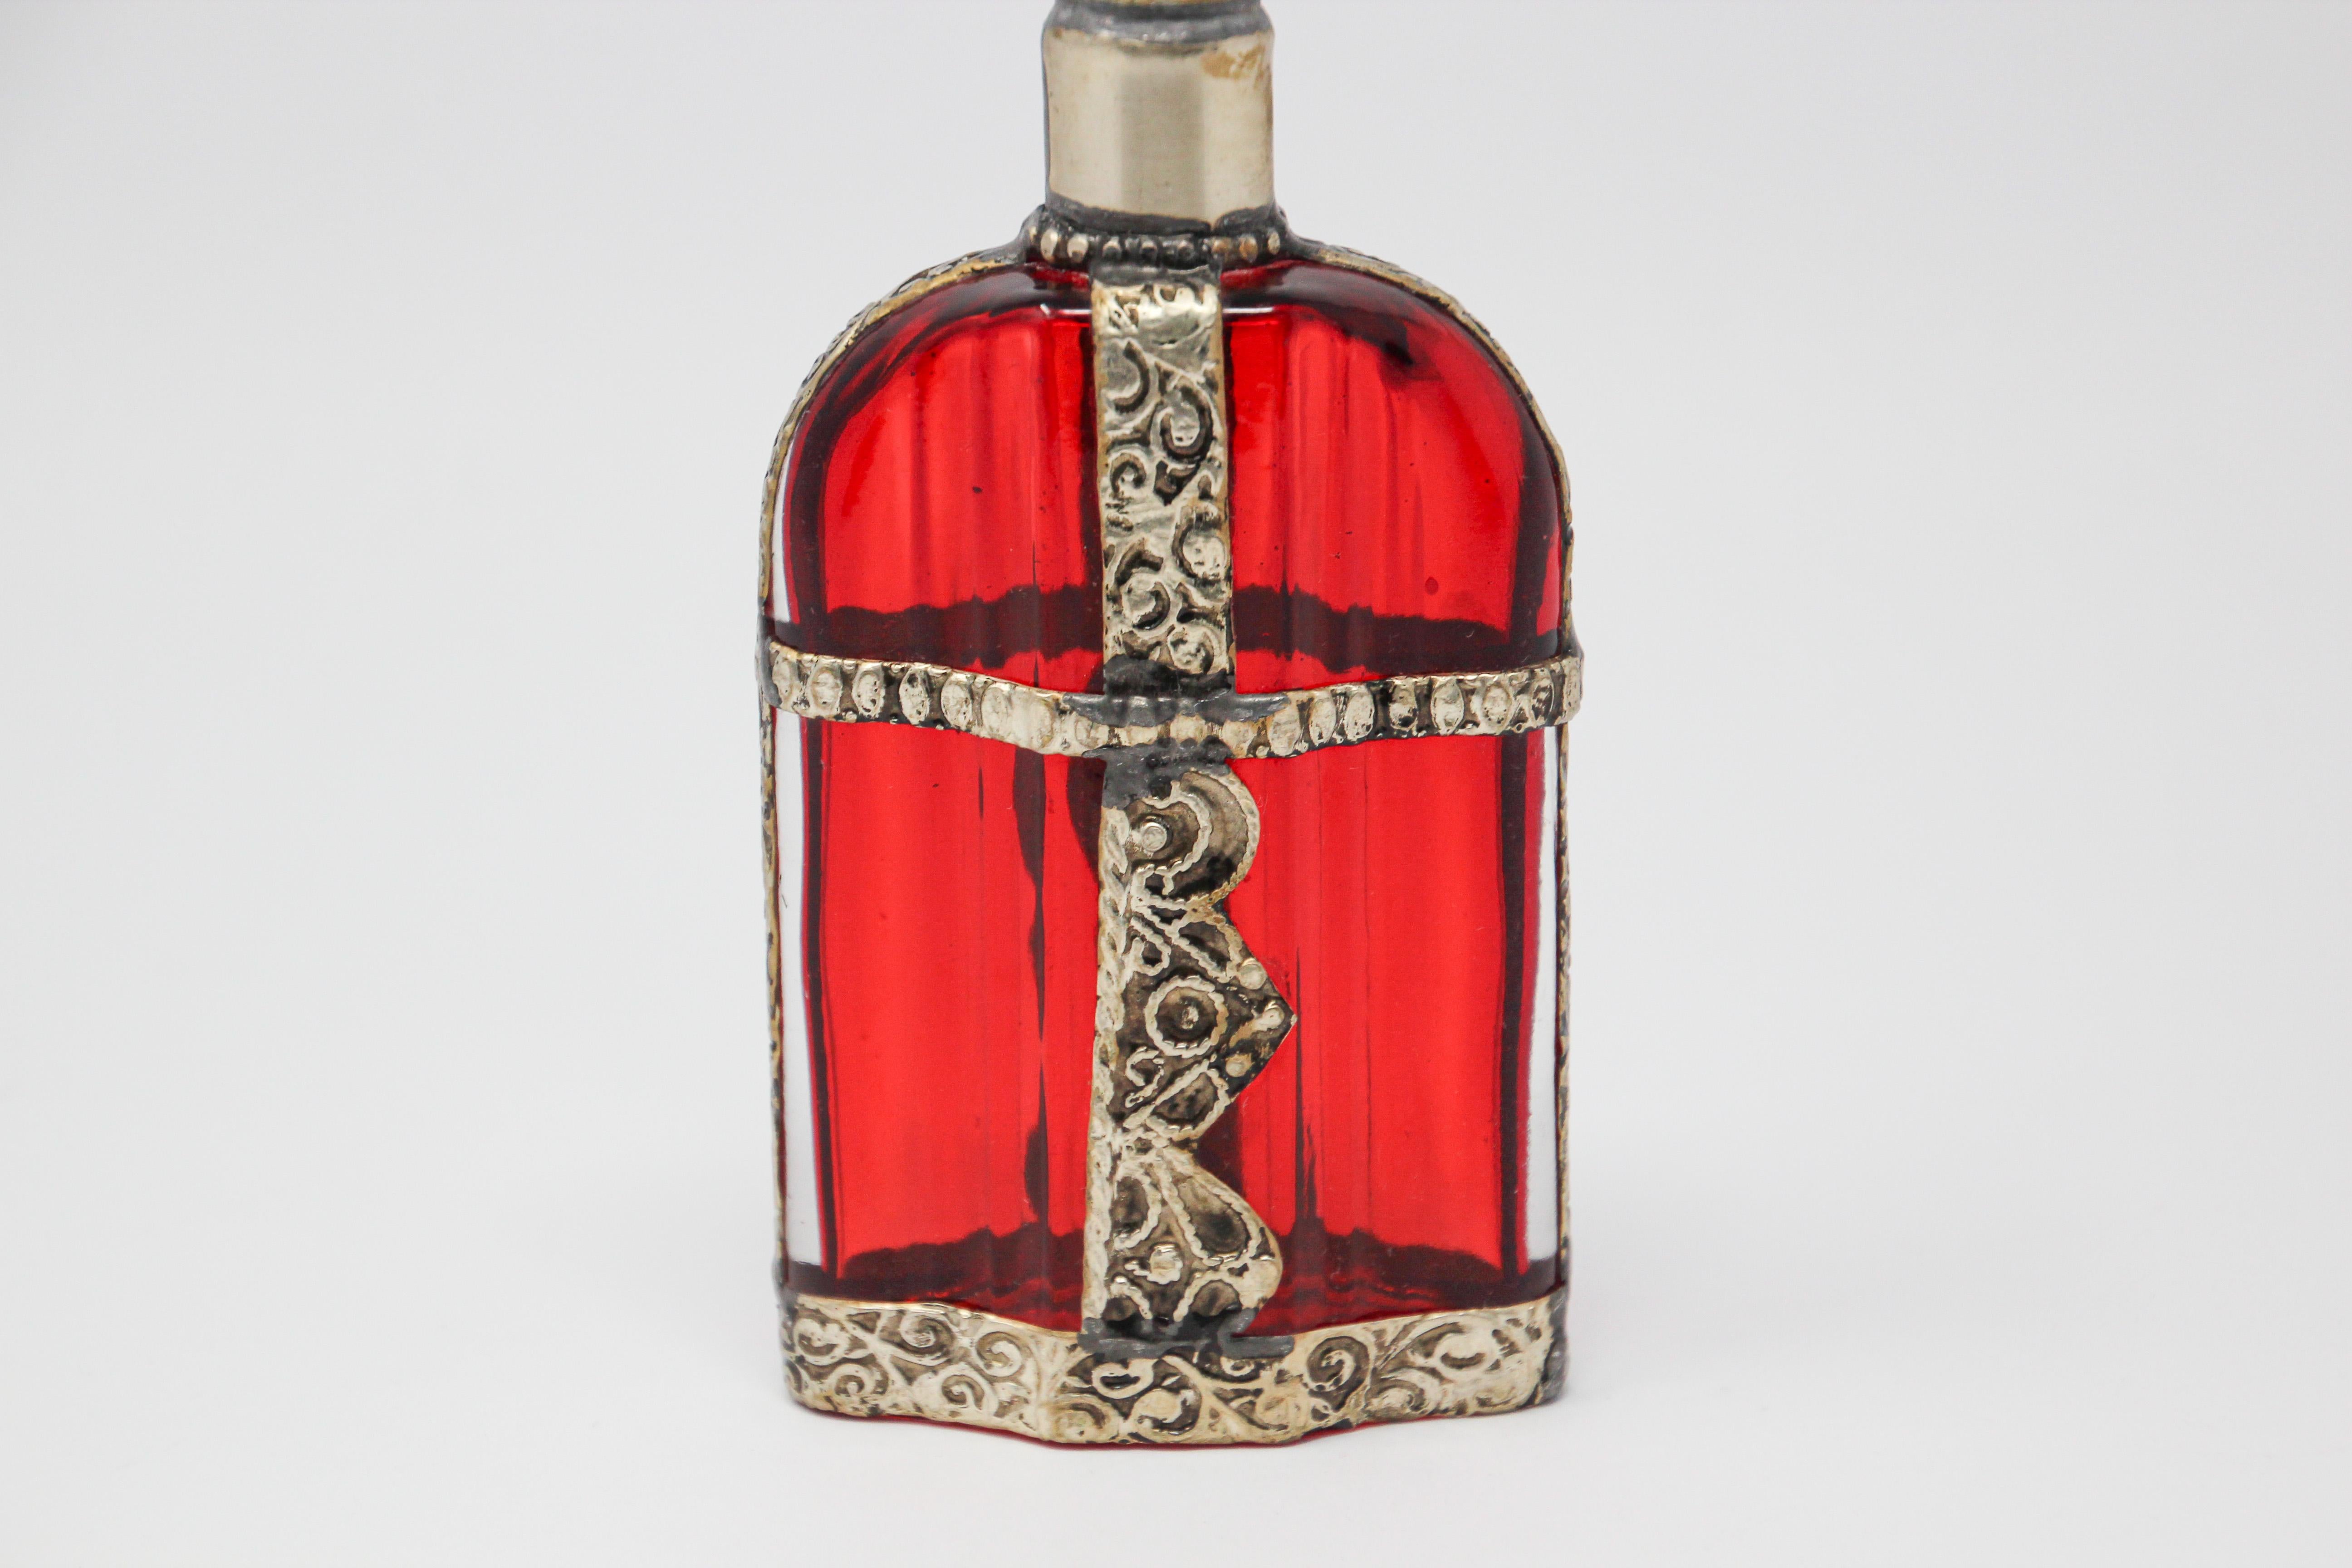 Handcrafted Moroccan Moorish red painted glass perfume bottle or rose water sprinkler with raised embossed silvered metal floral design over red glass.

The pressed glass bottle in Art Deco, Art Nouveau style is oval shape with curved sides and hand